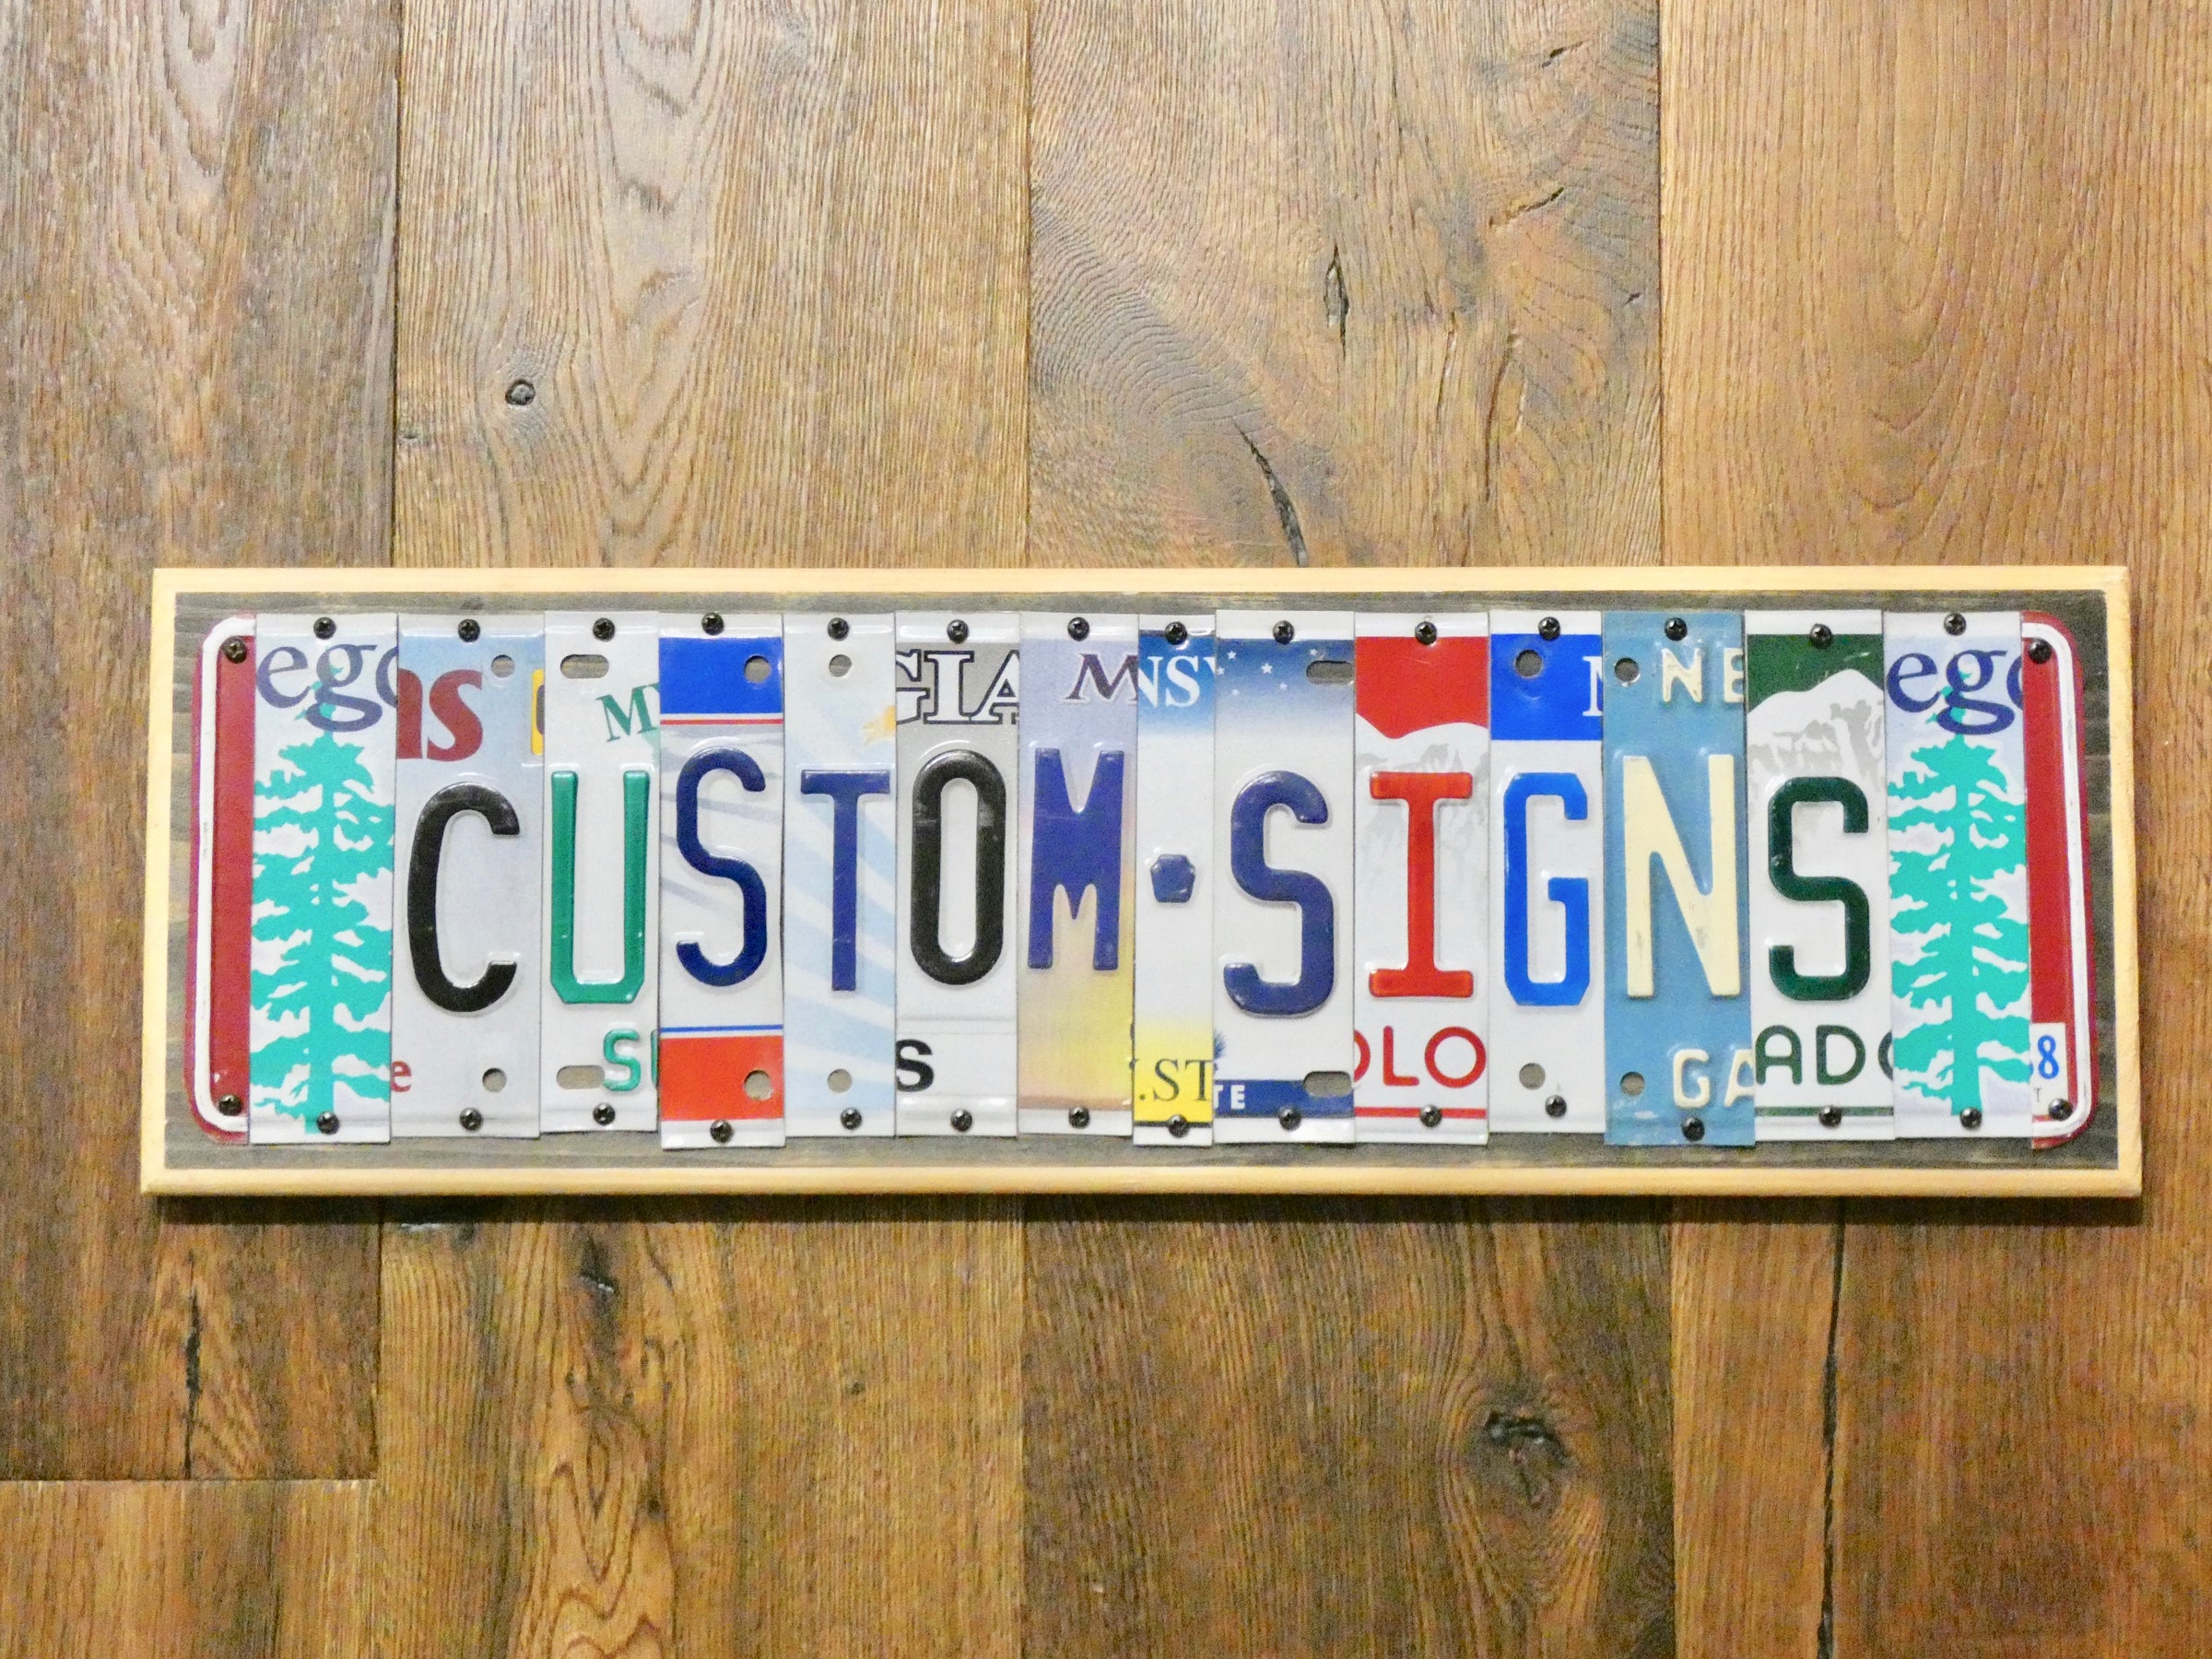 MAN CAVE Sign made with repurposed License Plates